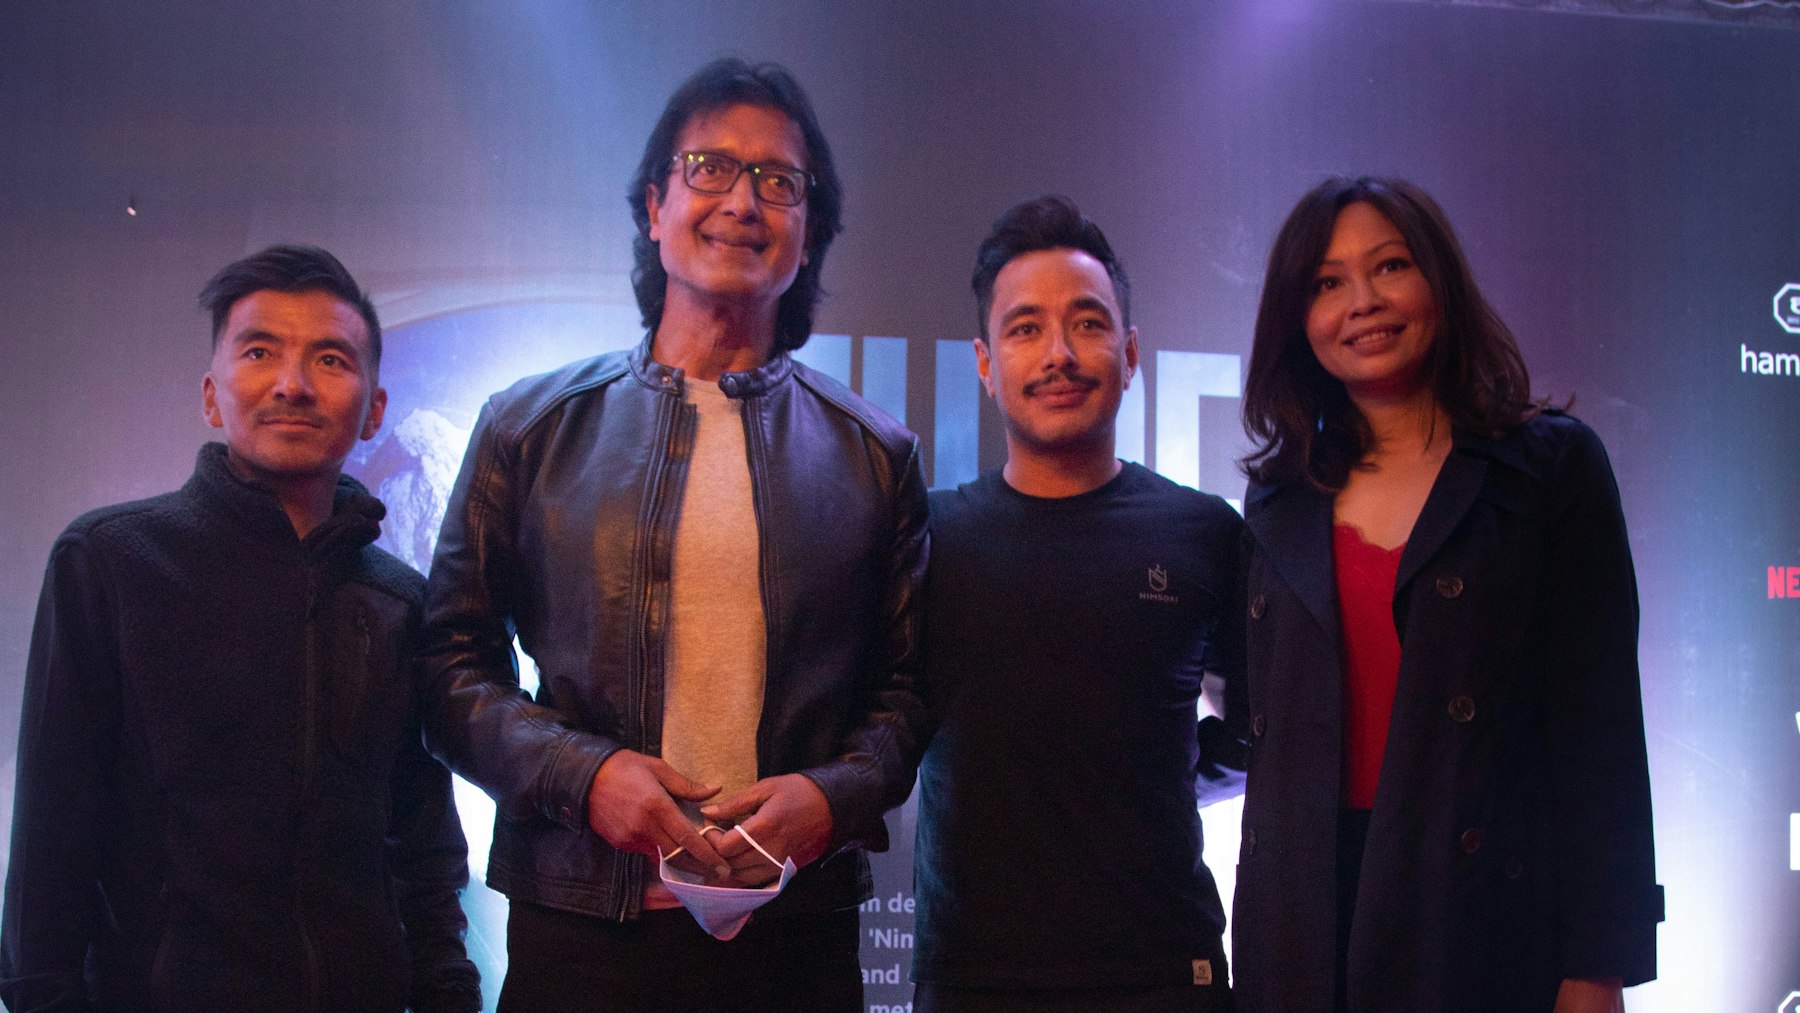 Nimsdai & Mingma David with Rajesh Hamel, the most popular and influential actor in Nepalese cinema along with his partner